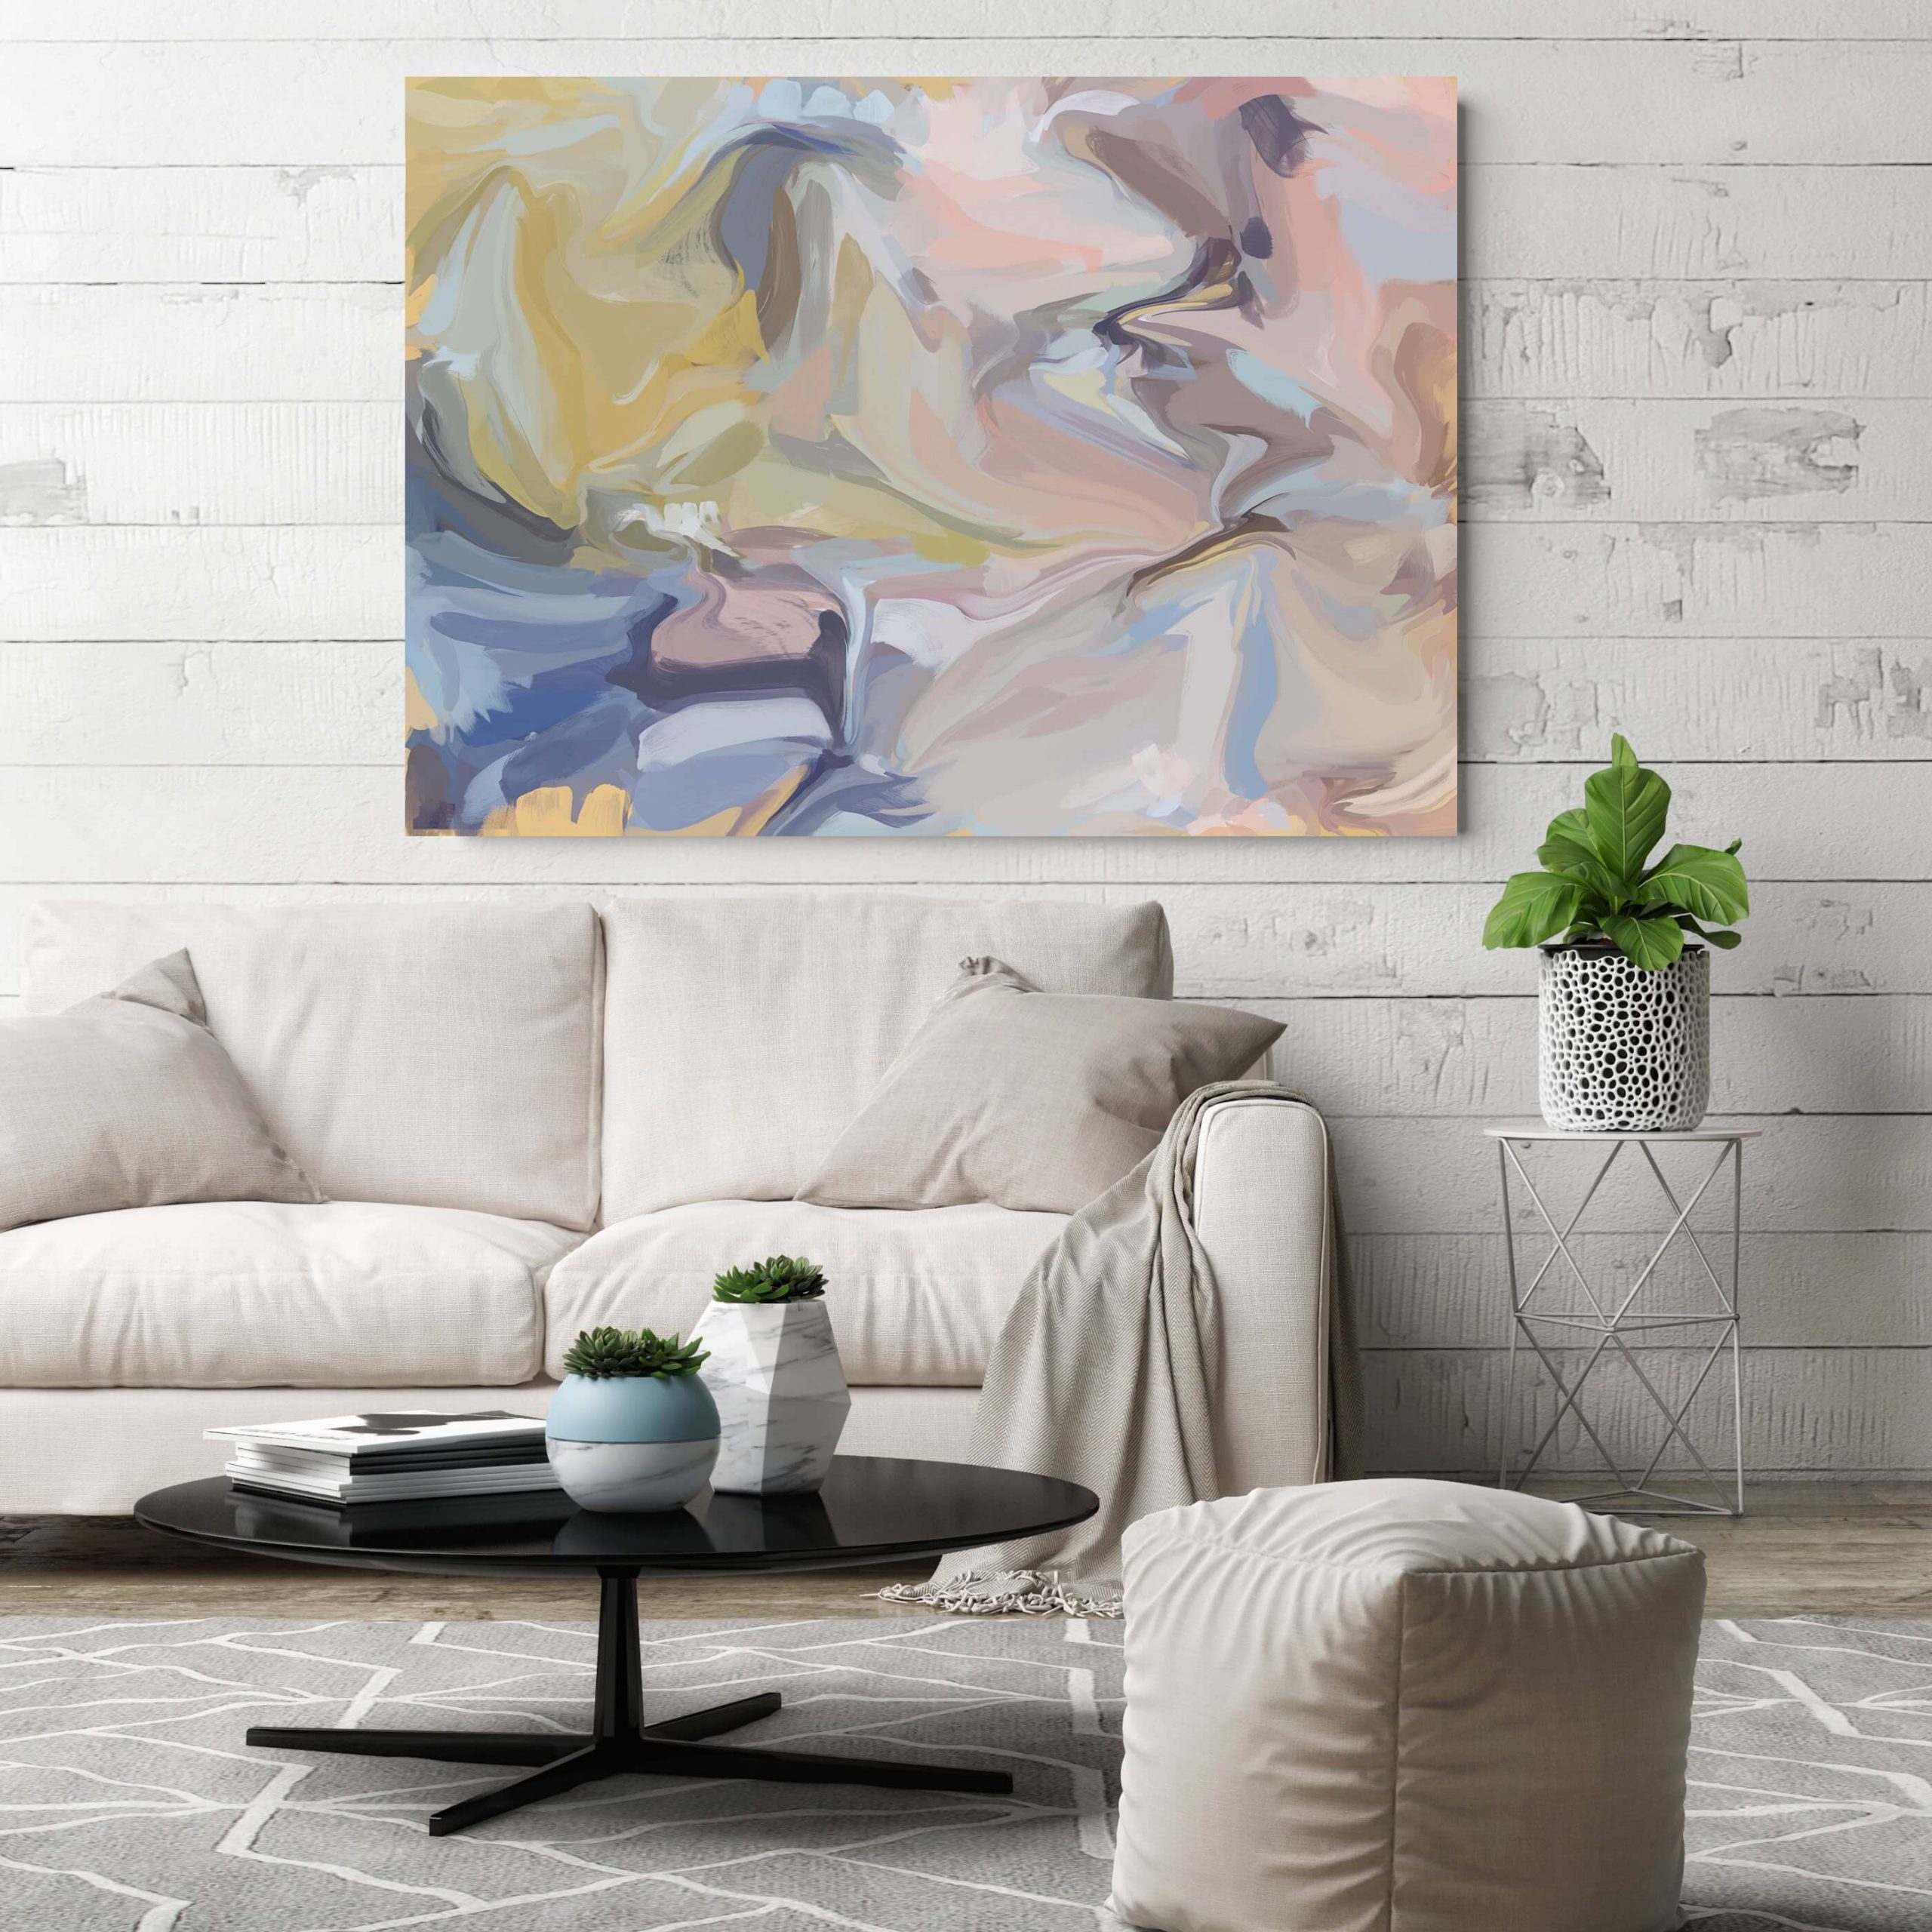 Simple Statement Art with Neutral Furniture